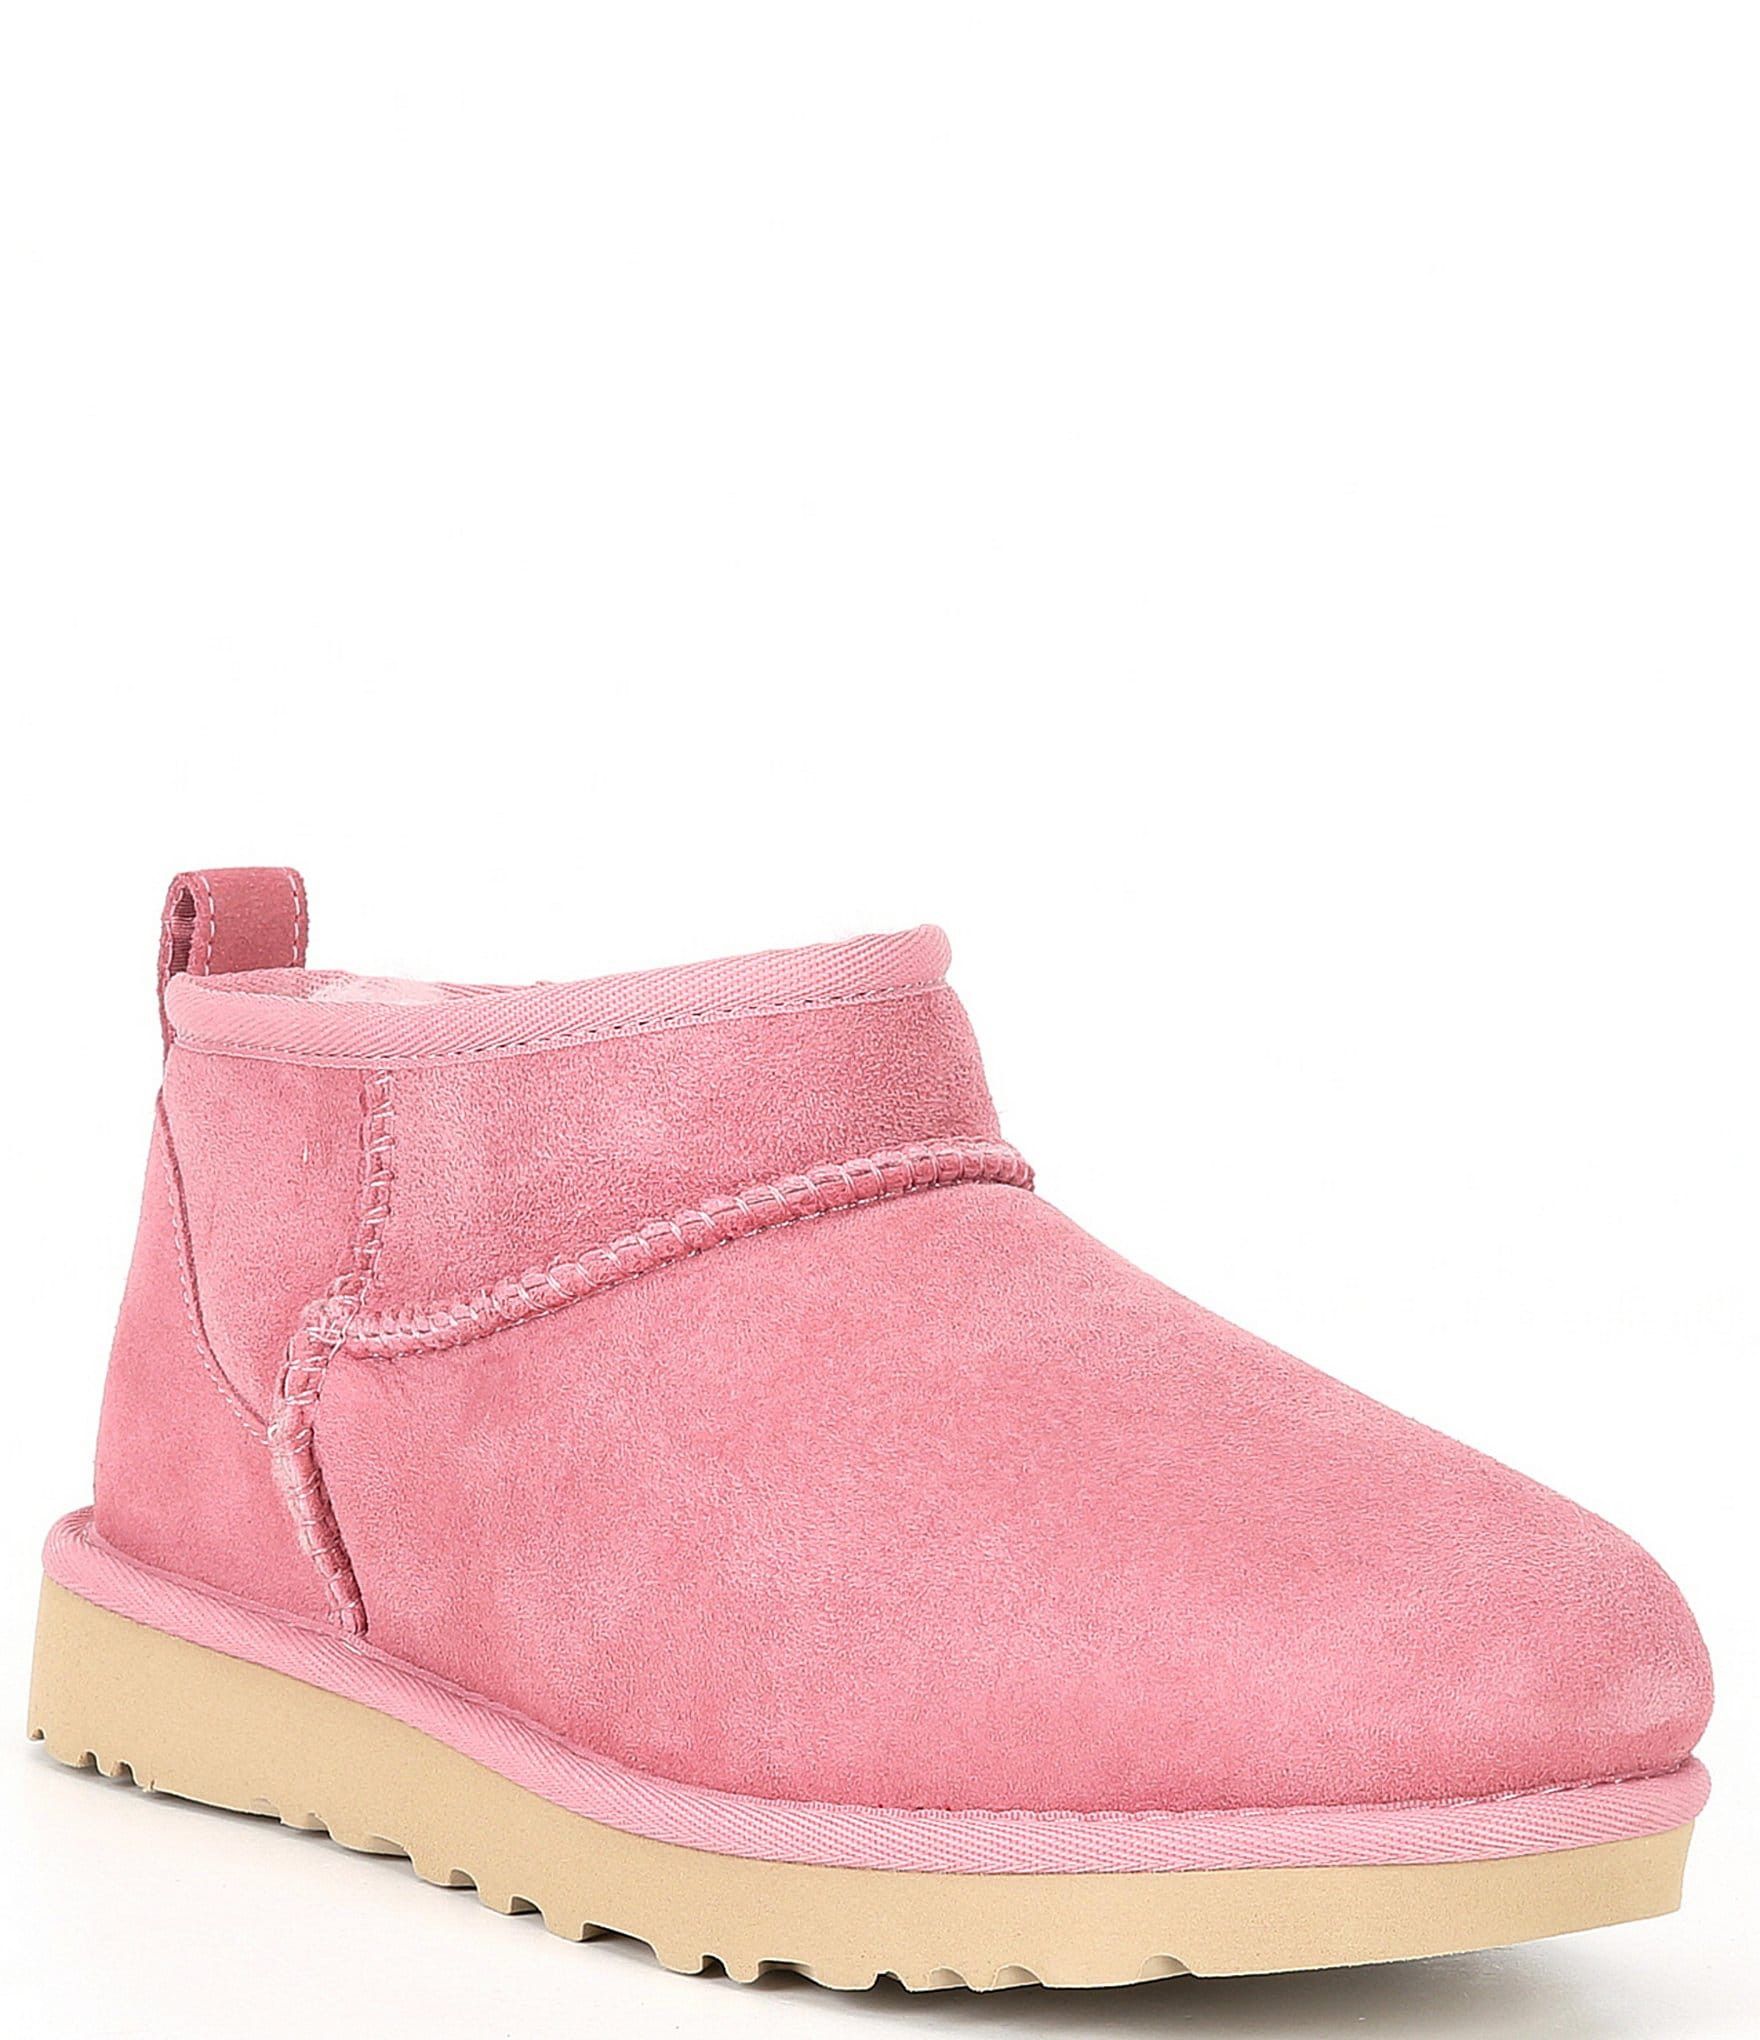 UGG® Classic Ultra Mini Water-Resistant Cold Weather Booties | Dillard's